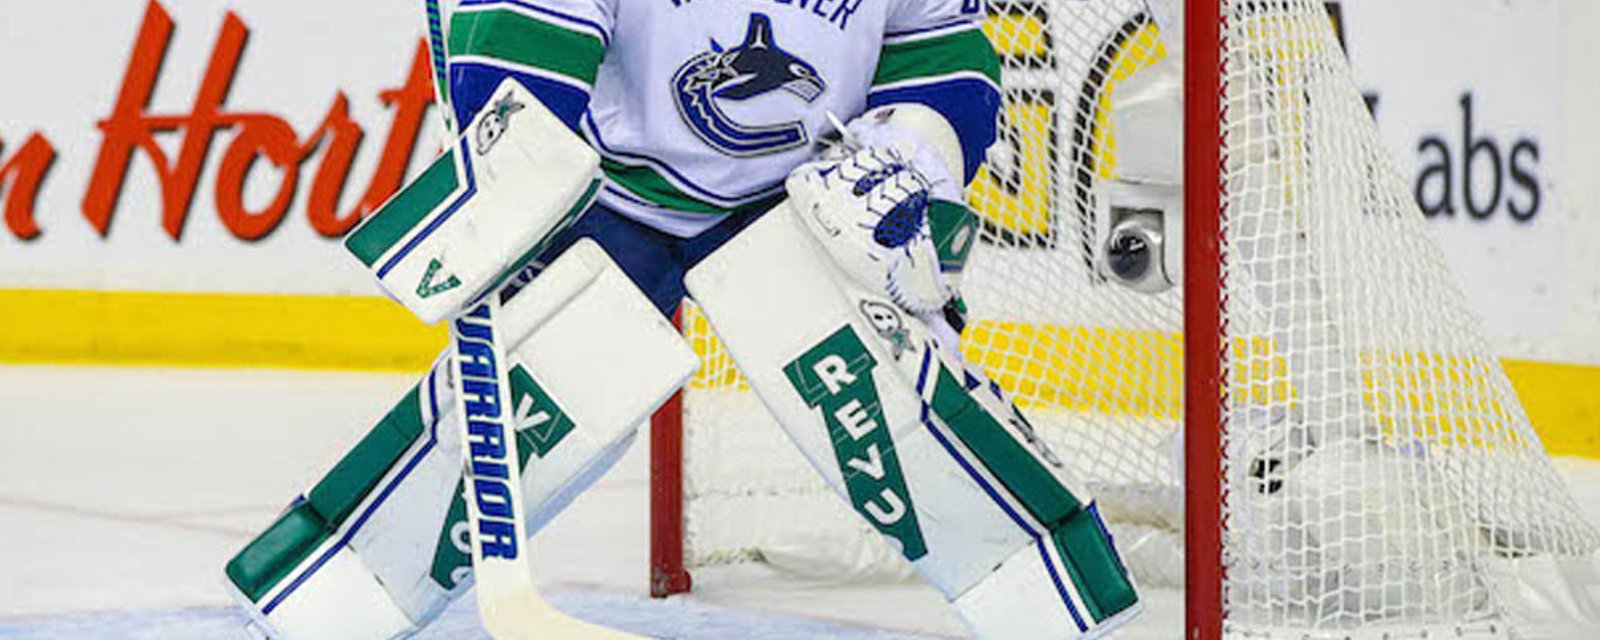 Former Canucks goalie says he'll come out of retirement to play for Demko